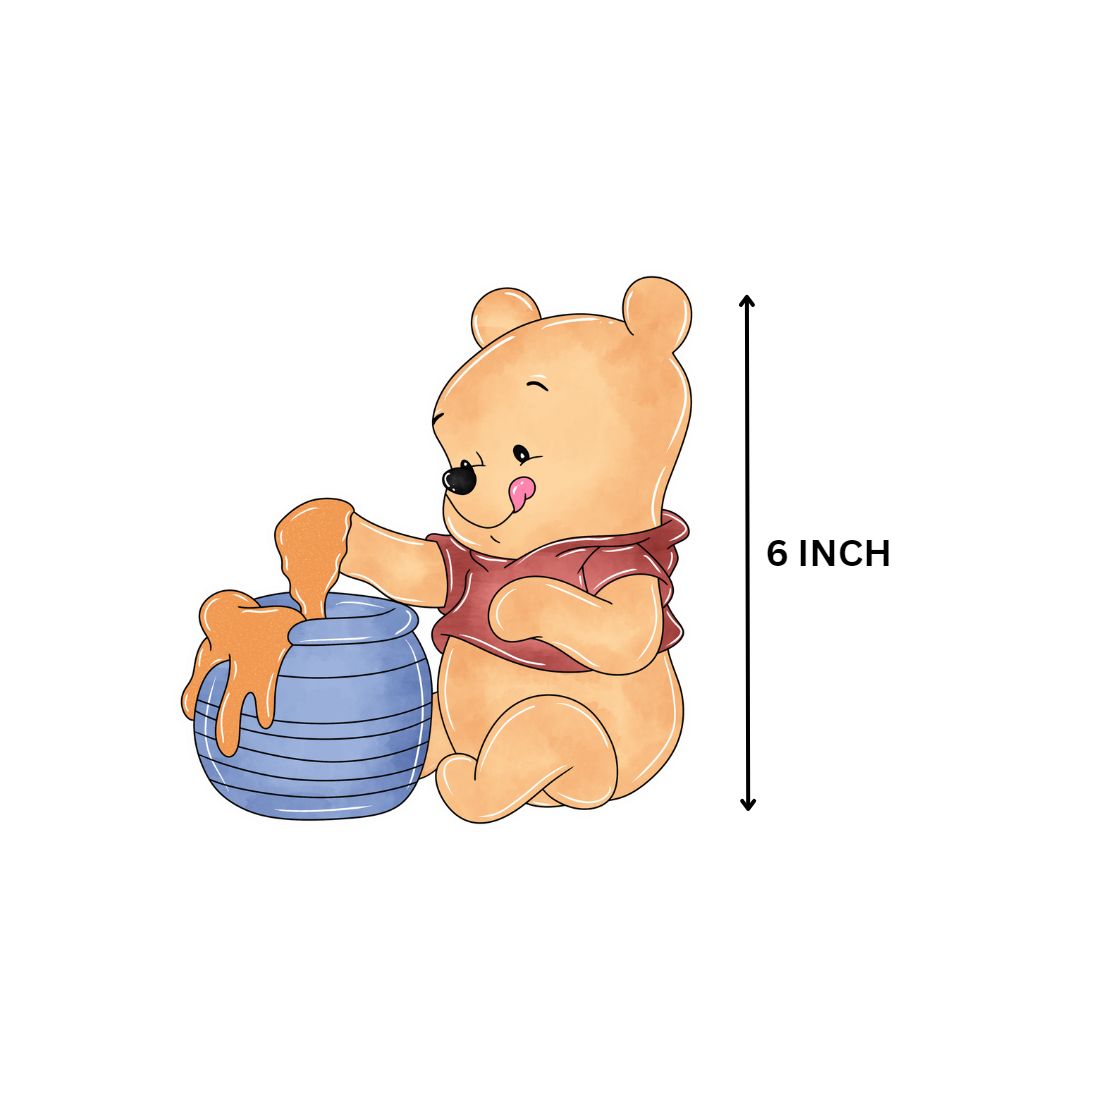 Winnie The Pooh Theme Cutout - (6 inches/250 GSM Cardstock/Mixcolour/12Pcs)